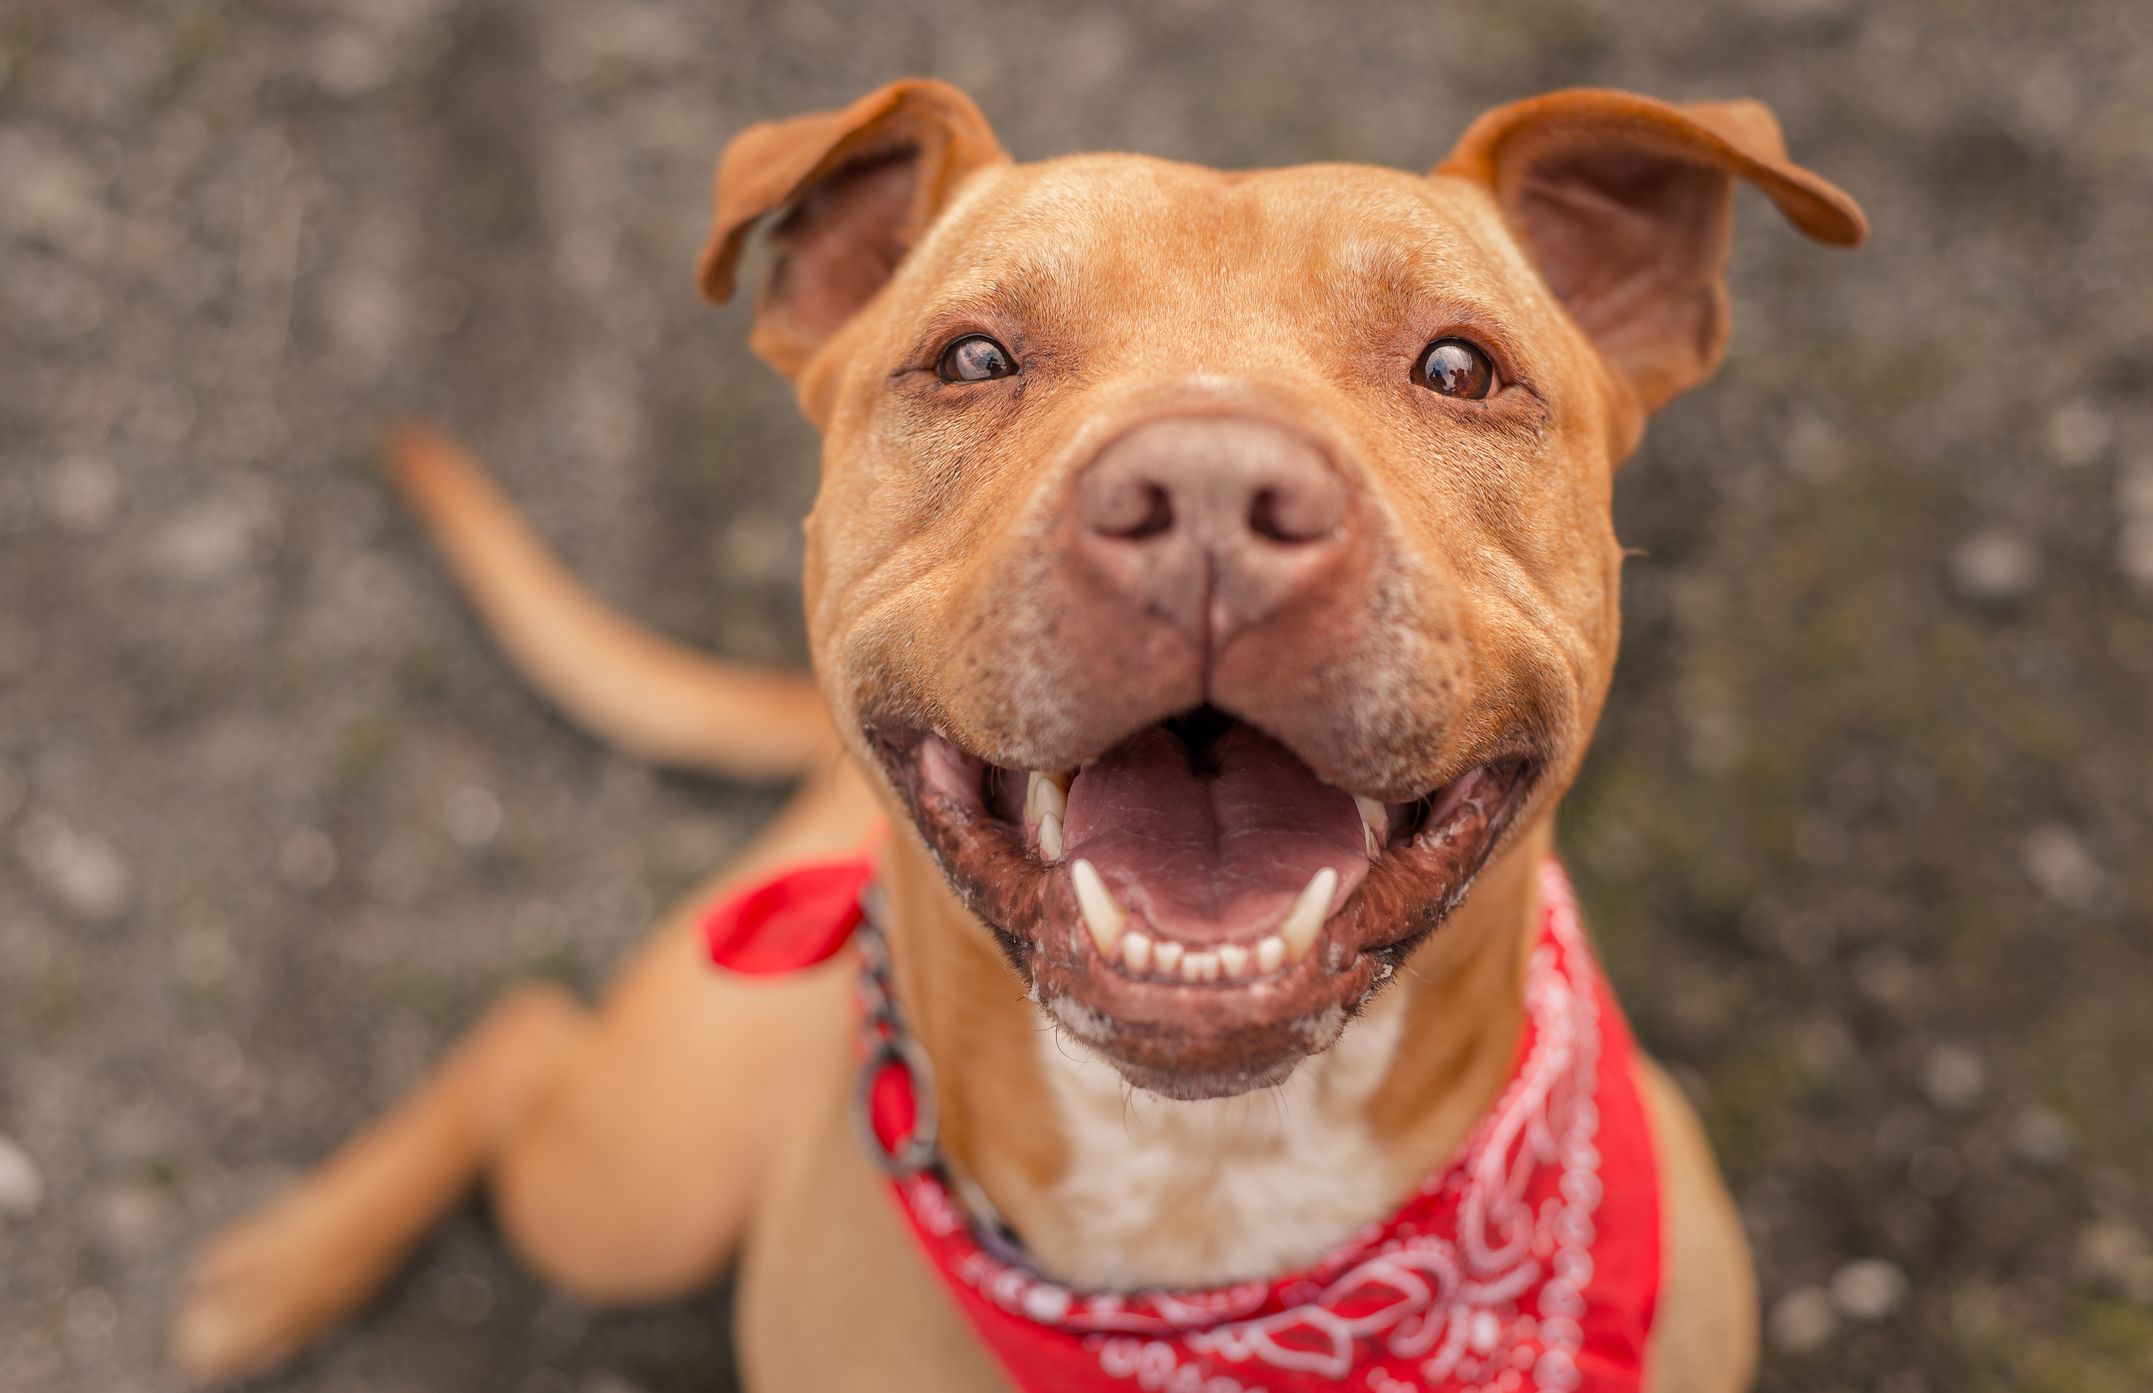 Are dogs actually happy when they smile?